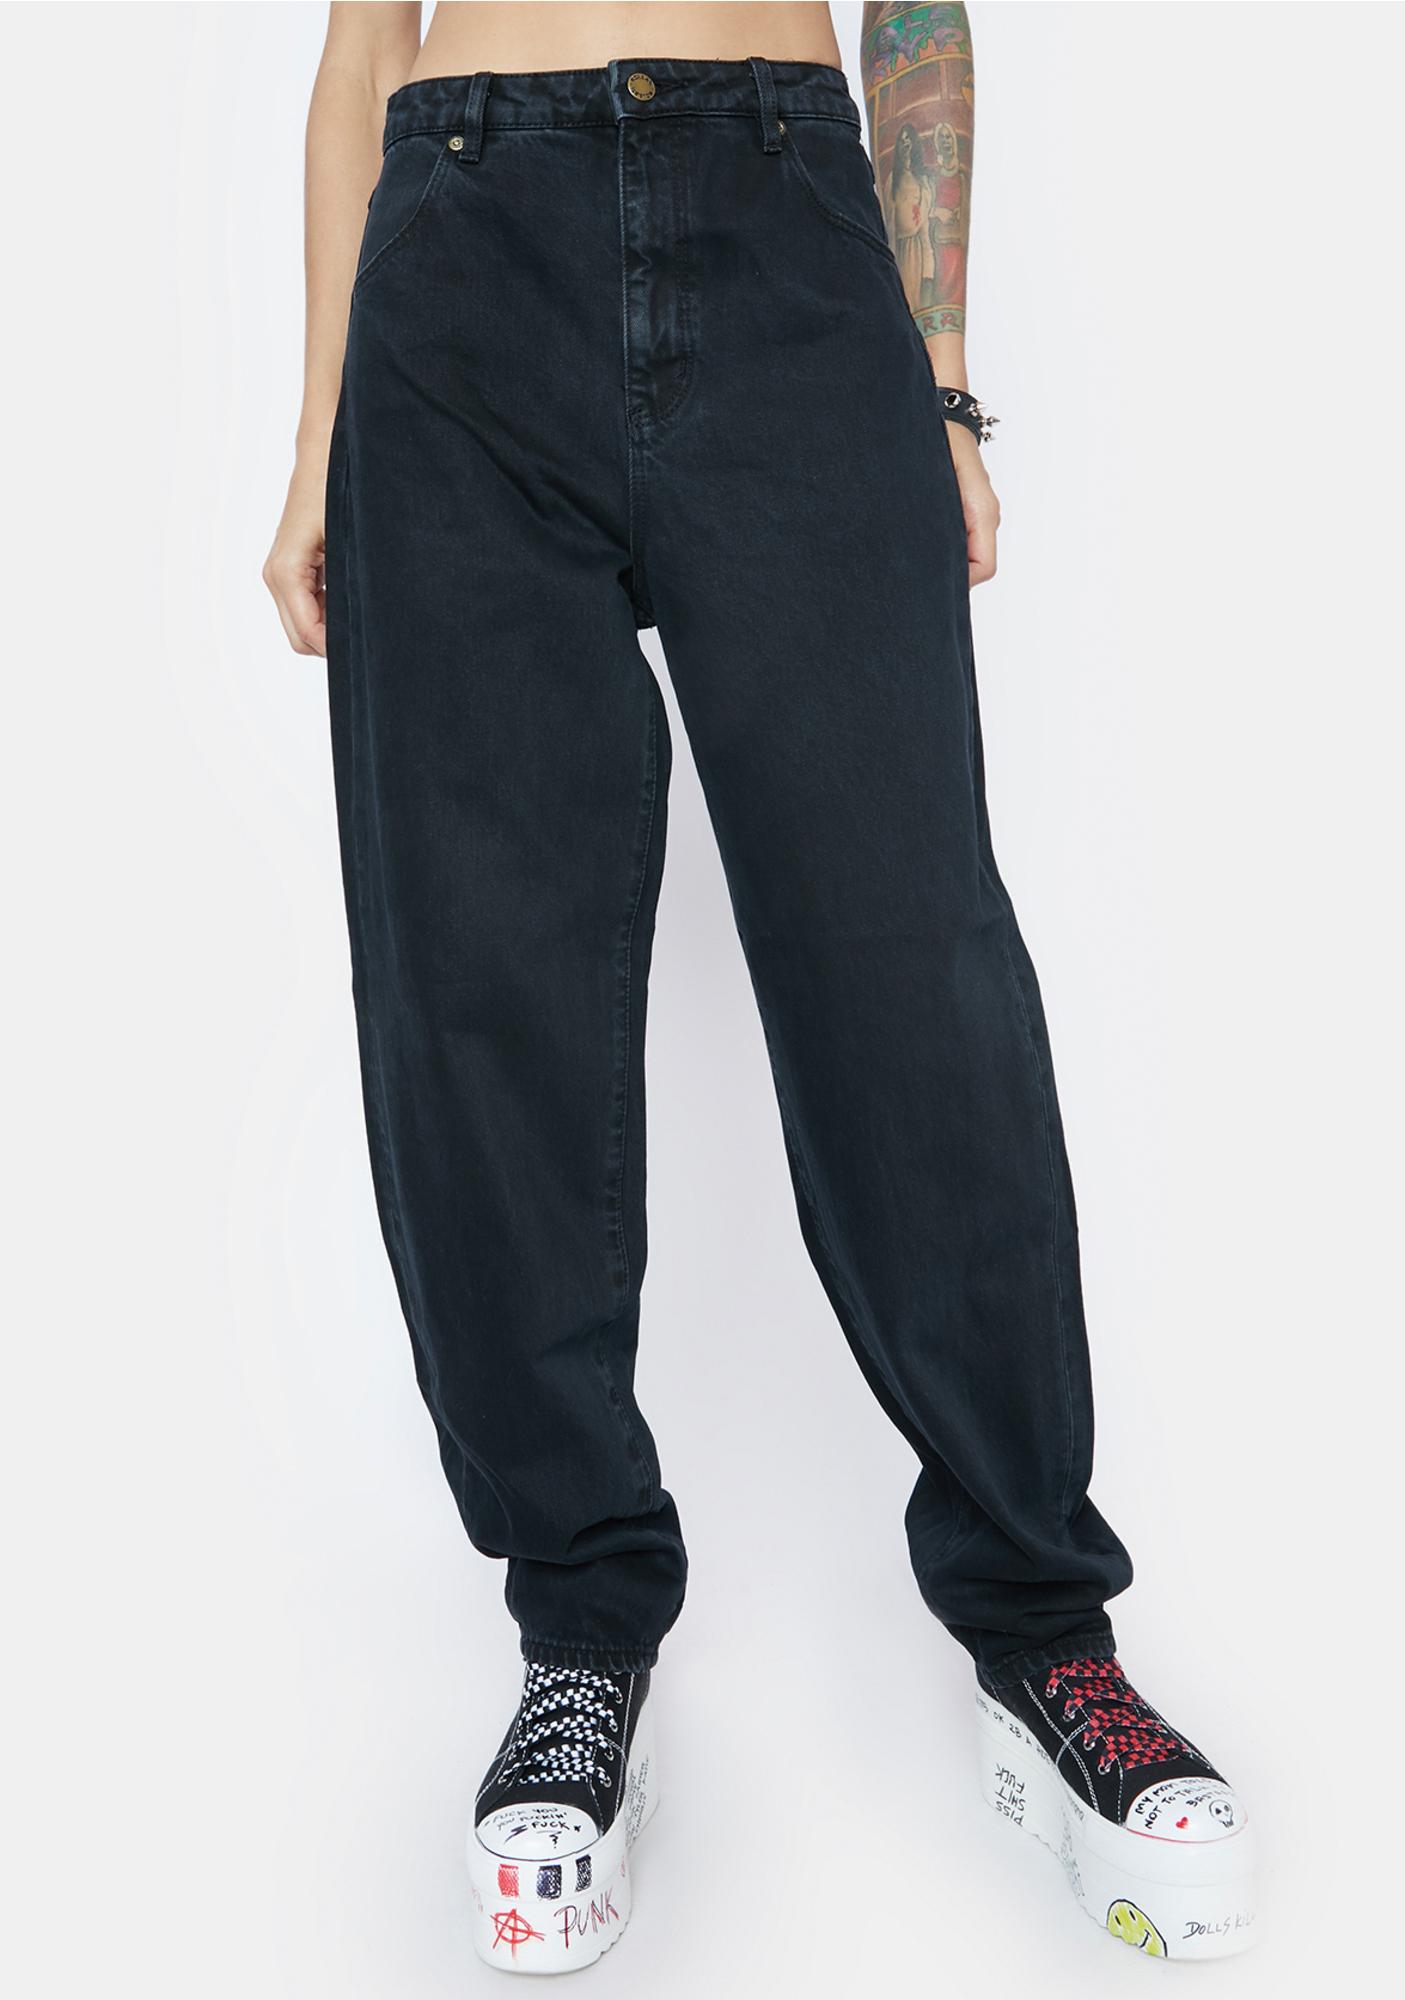 SHADOW BLACK GENIE DENIM JEANS by Rollas, available on dollskill.com for $66 Gigi Hadid Pants Exact Product 